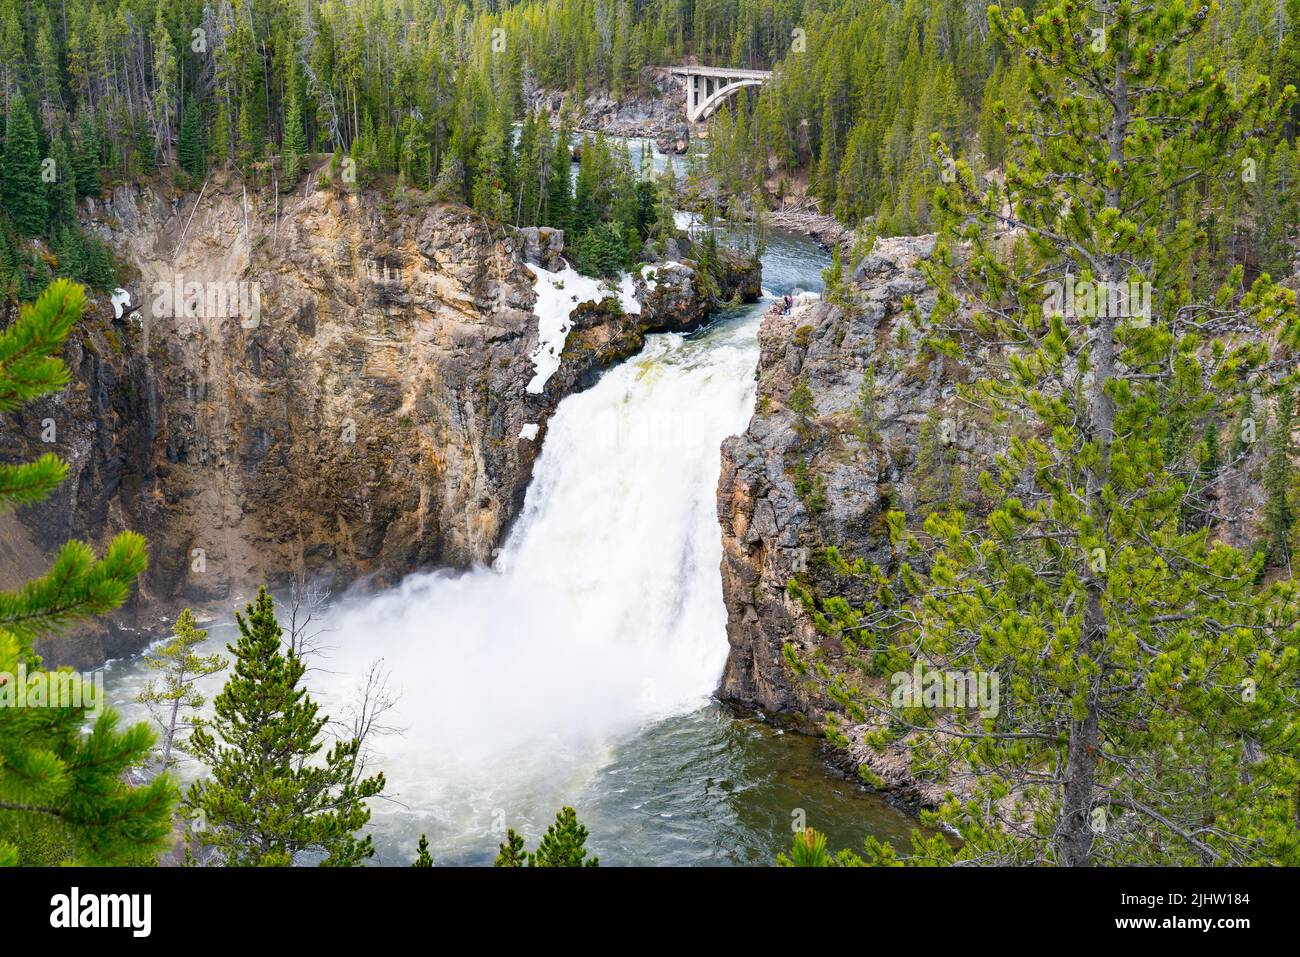 Upper Falls of the Yellowstone River in Yellowstone National Park, Wyoming Stock Photo